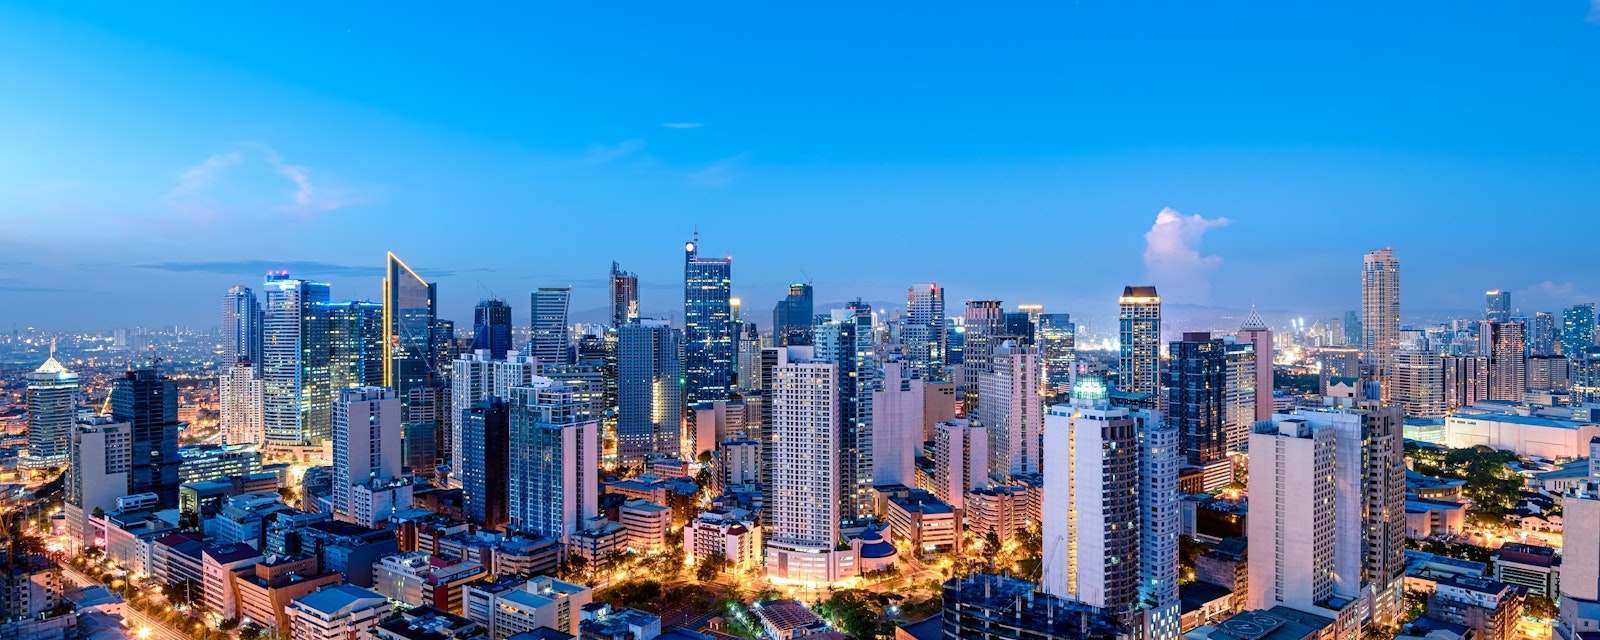 Eleveted,,Night,View,Of,Makati,,The,Business,District,Of,Metro